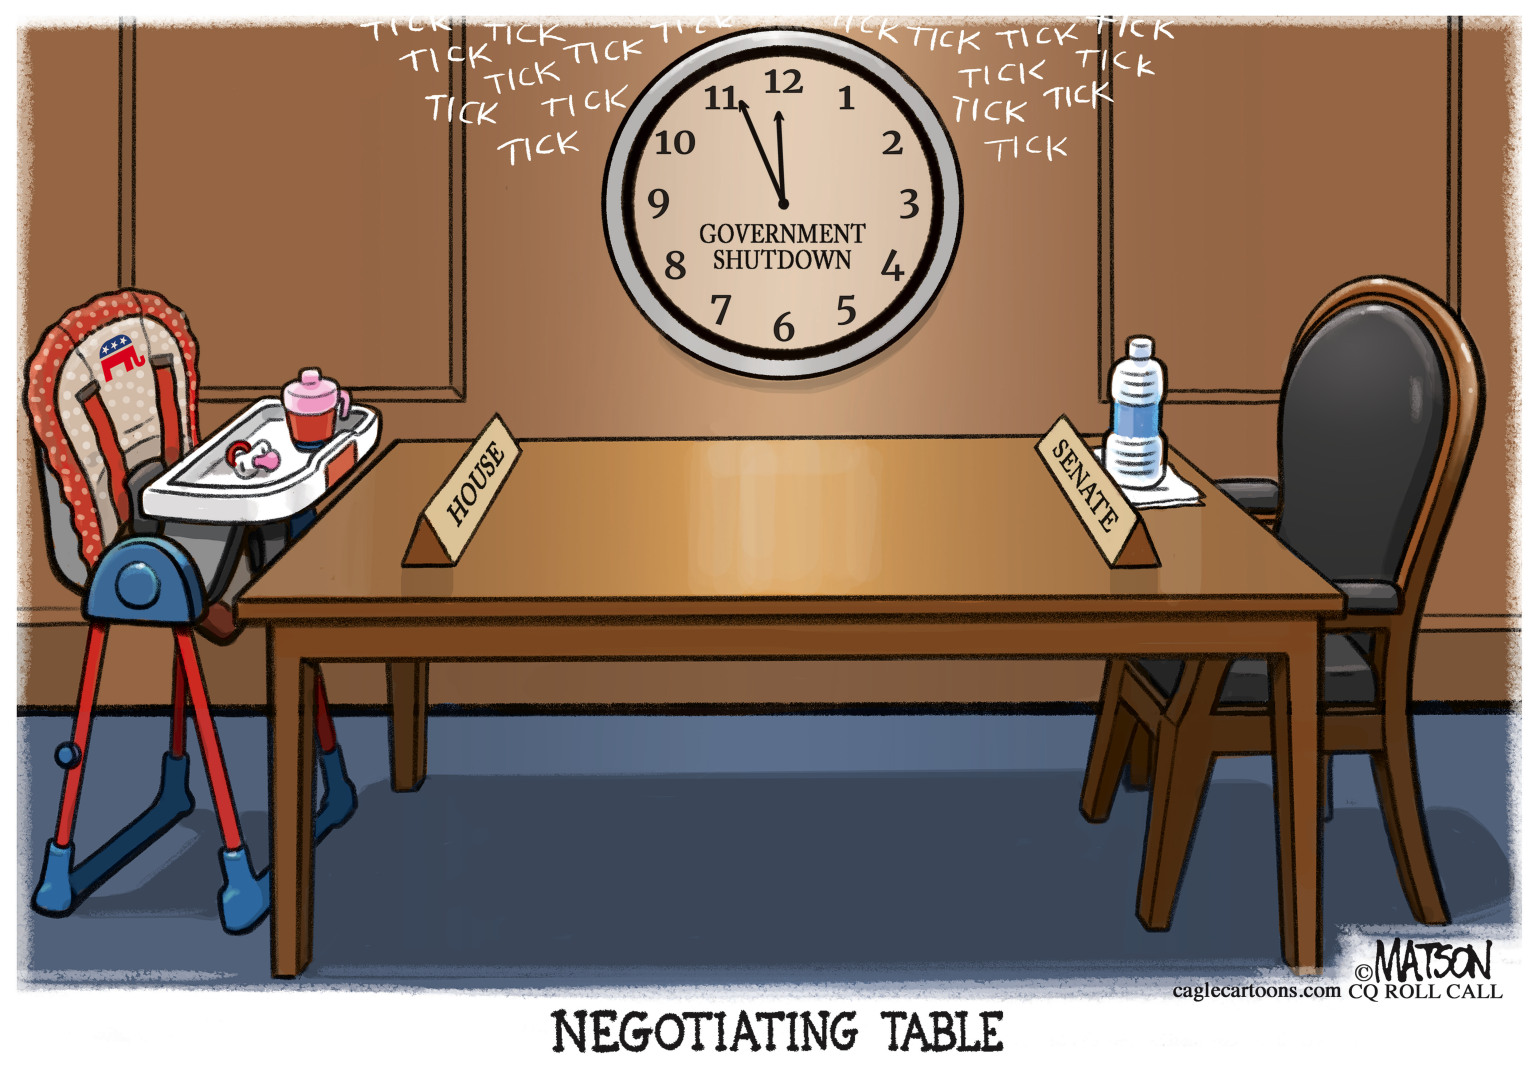 Government Shudtown Negotiating Table - By R.J. Matson